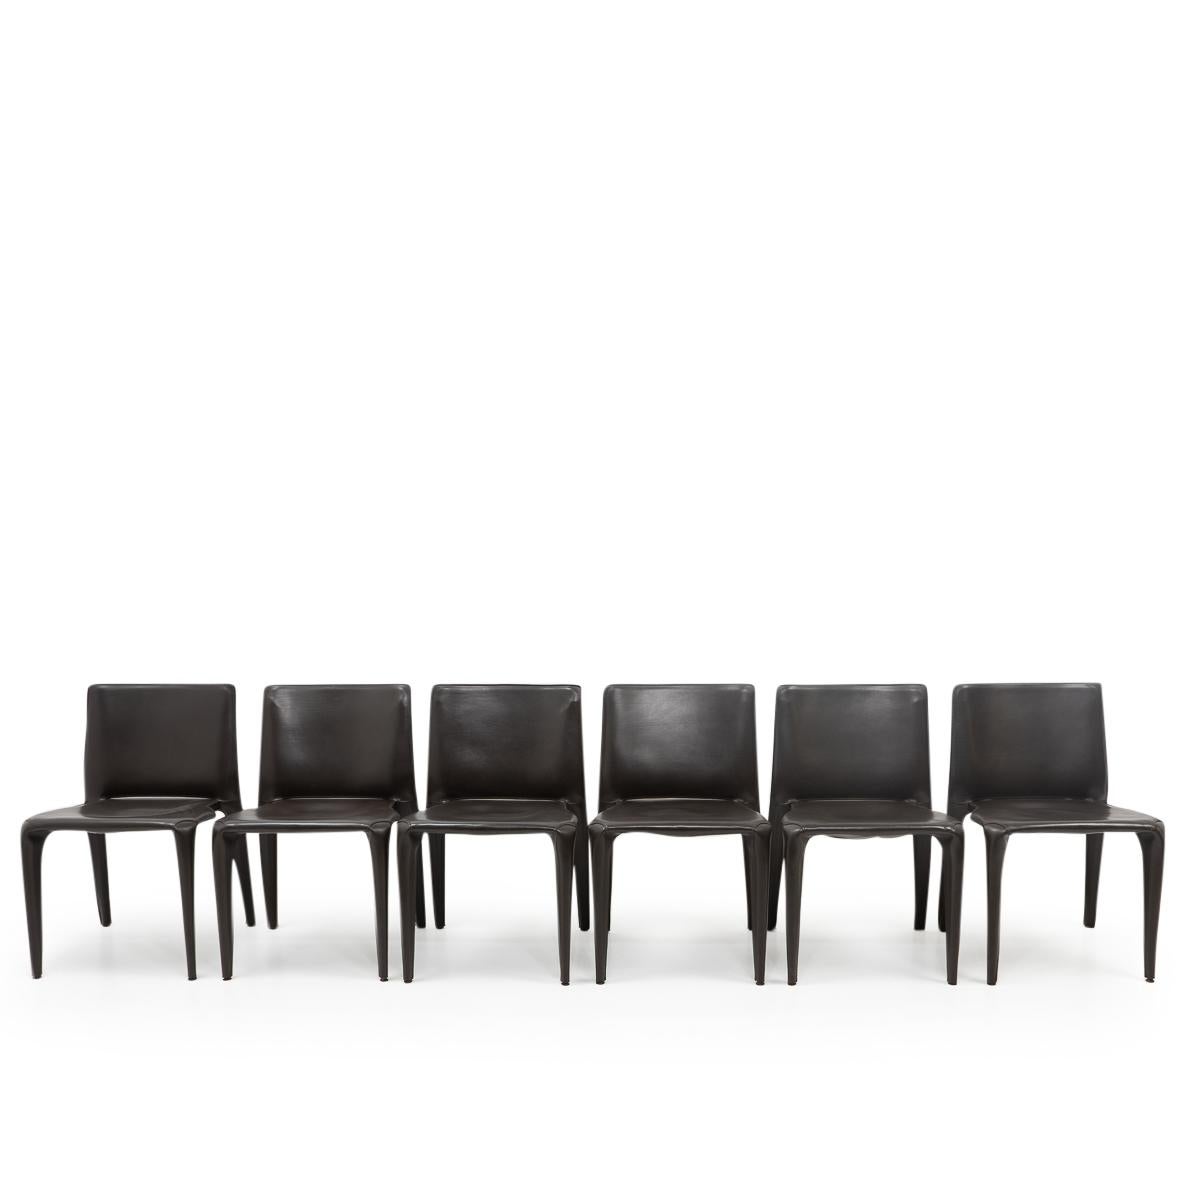 Set of six Bull dining chairs in dark brown leather by Mario Bellini for Cassina.

The Bull chair is built up as a tubular frame over which thick saddle leather is fitted; the leather skin is kept in place with zippers on the inside legs, very